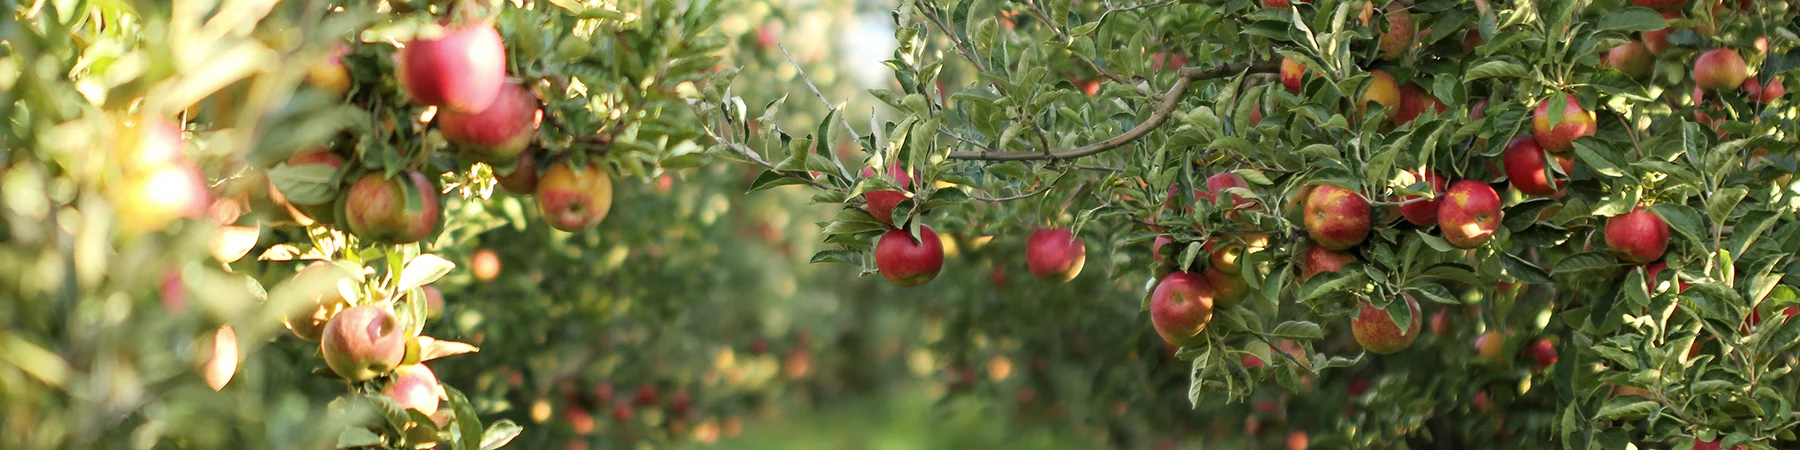 close up of apple trees in orchard